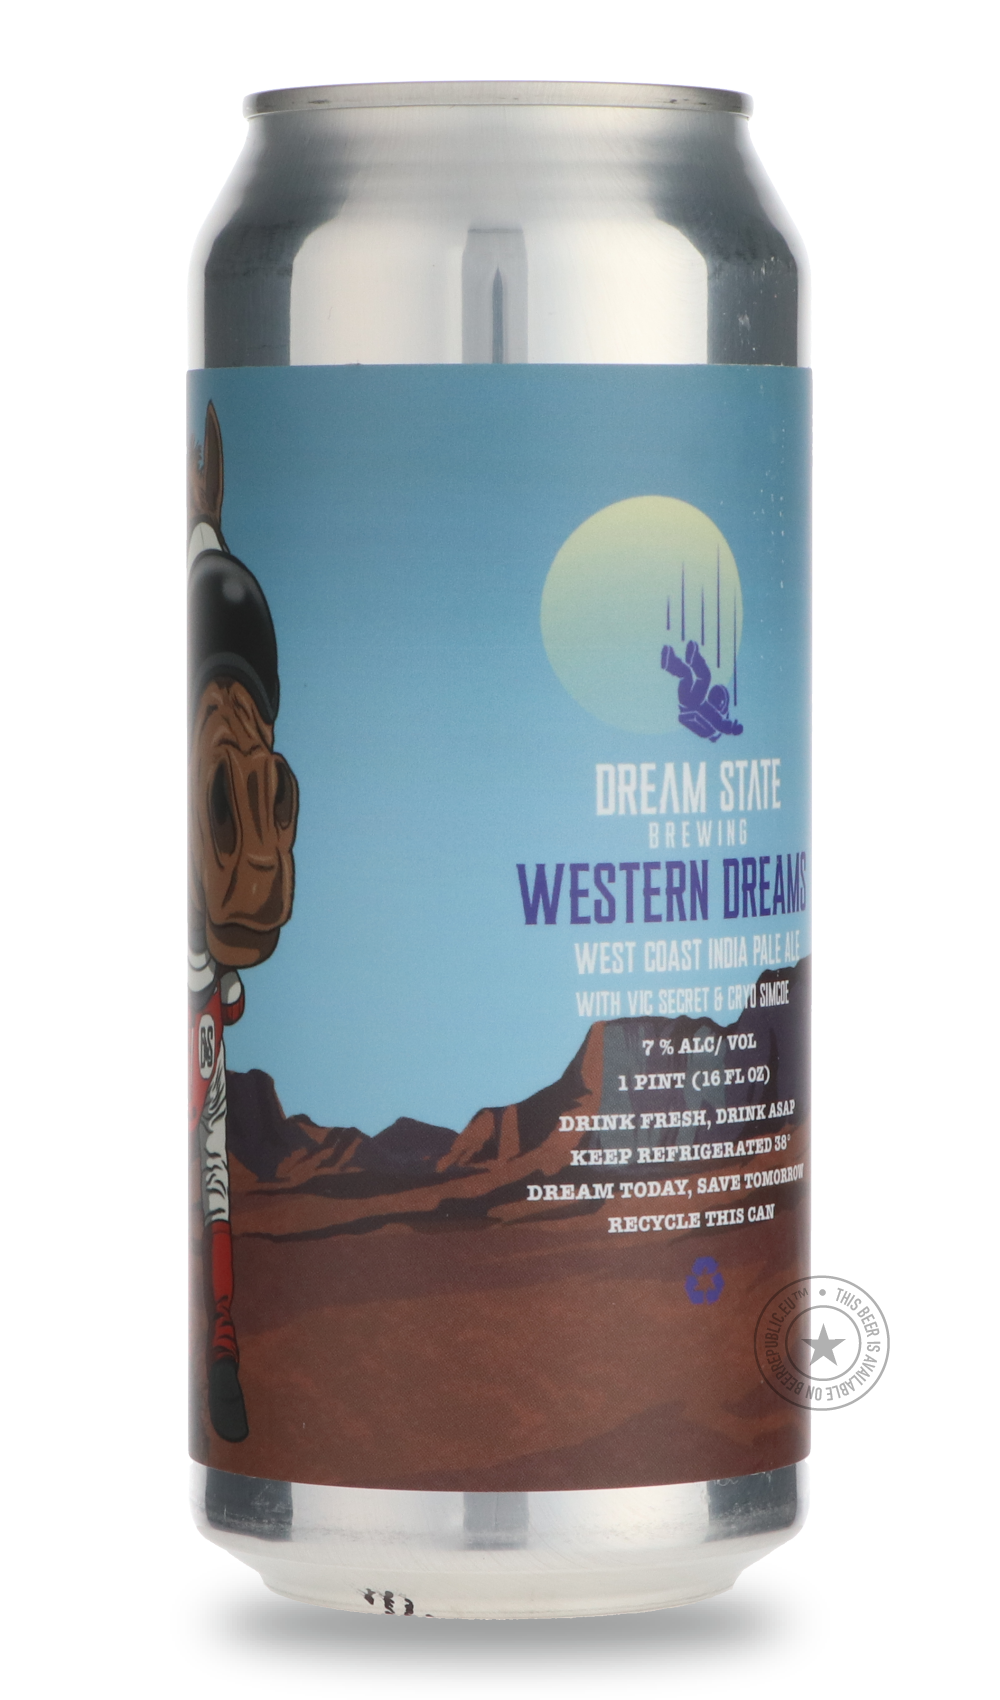 -Dream State- Western Dreams-IPA- Only @ Beer Republic - The best online beer store for American & Canadian craft beer - Buy beer online from the USA and Canada - Bier online kopen - Amerikaans bier kopen - Craft beer store - Craft beer kopen - Amerikanisch bier kaufen - Bier online kaufen - Acheter biere online - IPA - Stout - Porter - New England IPA - Hazy IPA - Imperial Stout - Barrel Aged - Barrel Aged Imperial Stout - Brown - Dark beer - Blond - Blonde - Pilsner - Lager - Wheat - Weizen - Amber - Barl